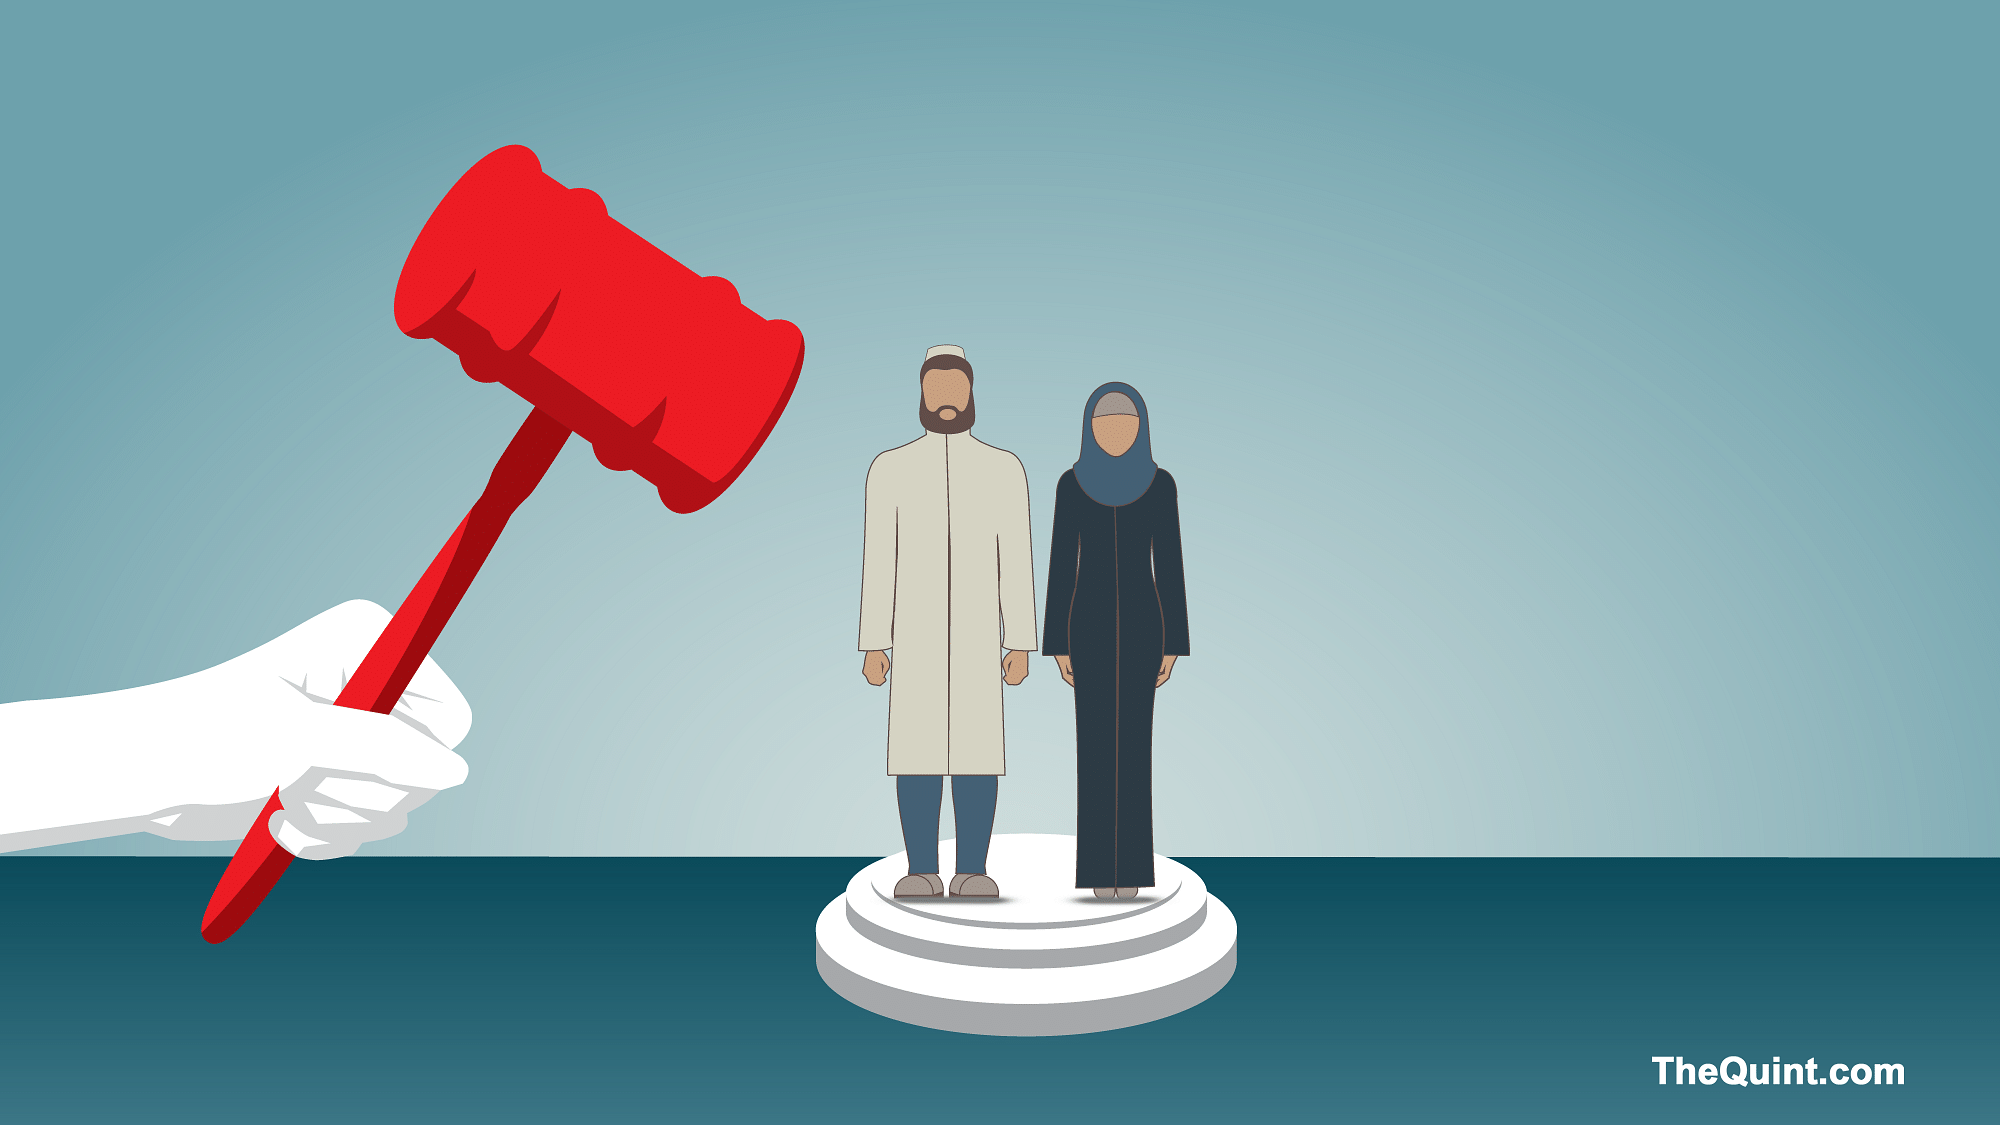 According to Muslim personal law based on the Sharia, a Muslim man can divorce his wife by pronouncing talaq thrice. The Supreme Court of India today struck the practice down as unconstitutional. 